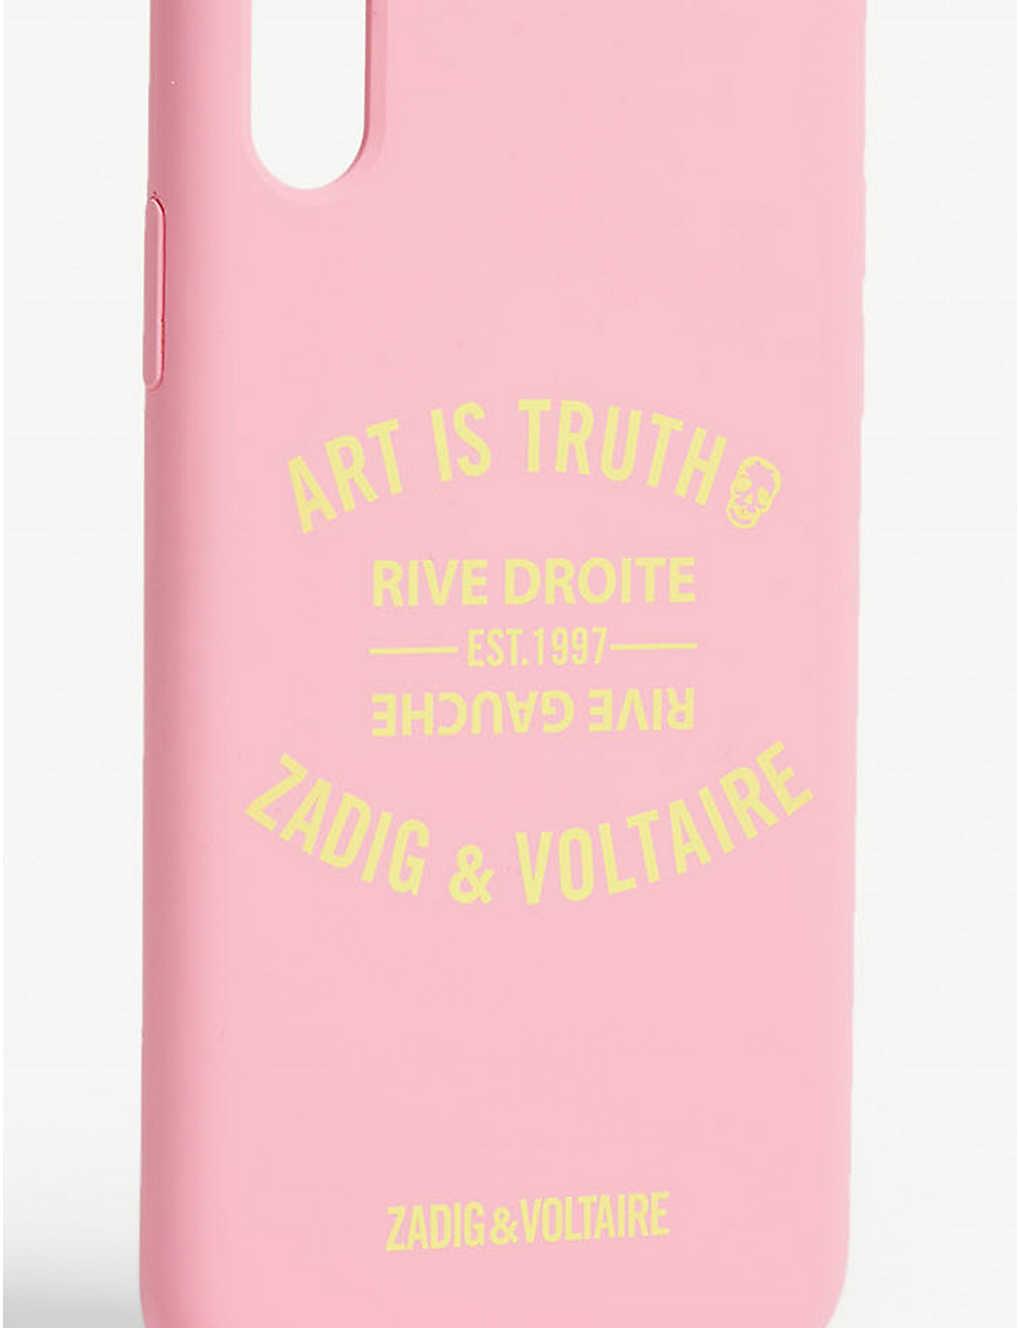 Zadig & Voltaire Art Is Truth Iphone X Case in Pink | Lyst